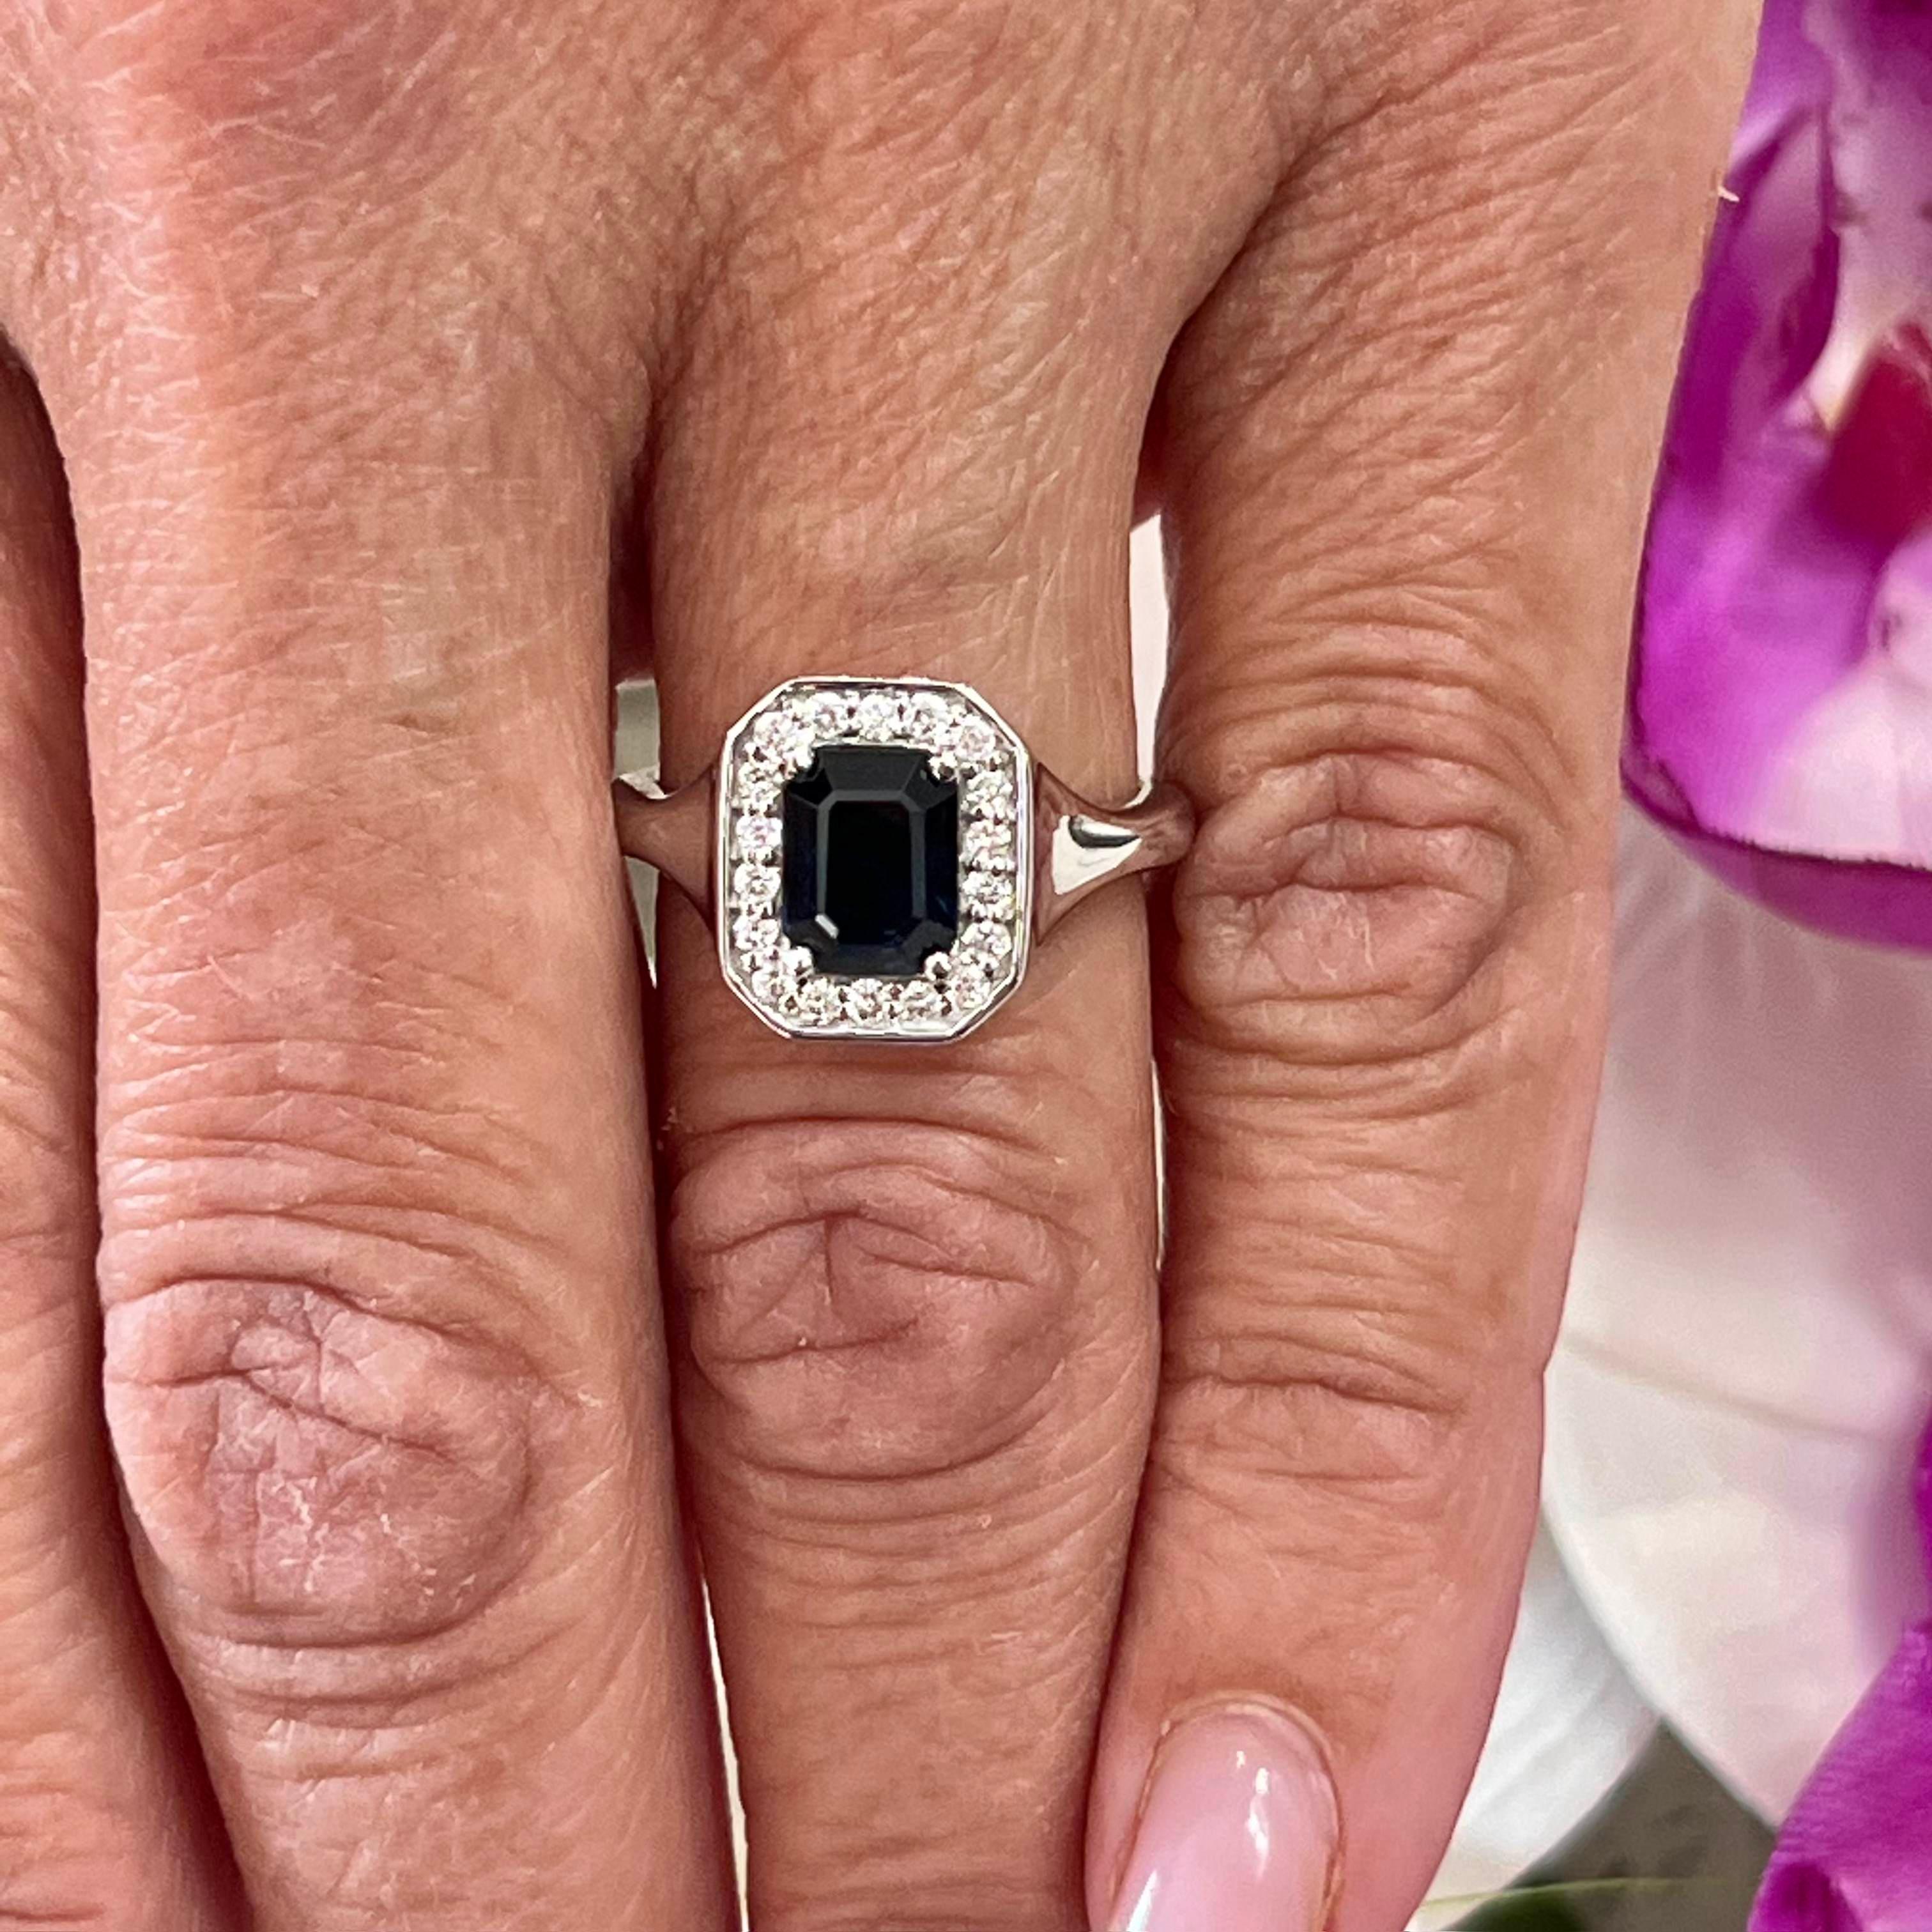 Natural Sapphire Diamond Ring Size 6.25 14k W Gold 1.82 TCW Certified $4,950 216683

This is a Unique Custom Made Glamorous Piece of Jewelry!

Nothing says, “I Love you” more than Diamonds and Pearls!

This Sapphire ring has been Certified,